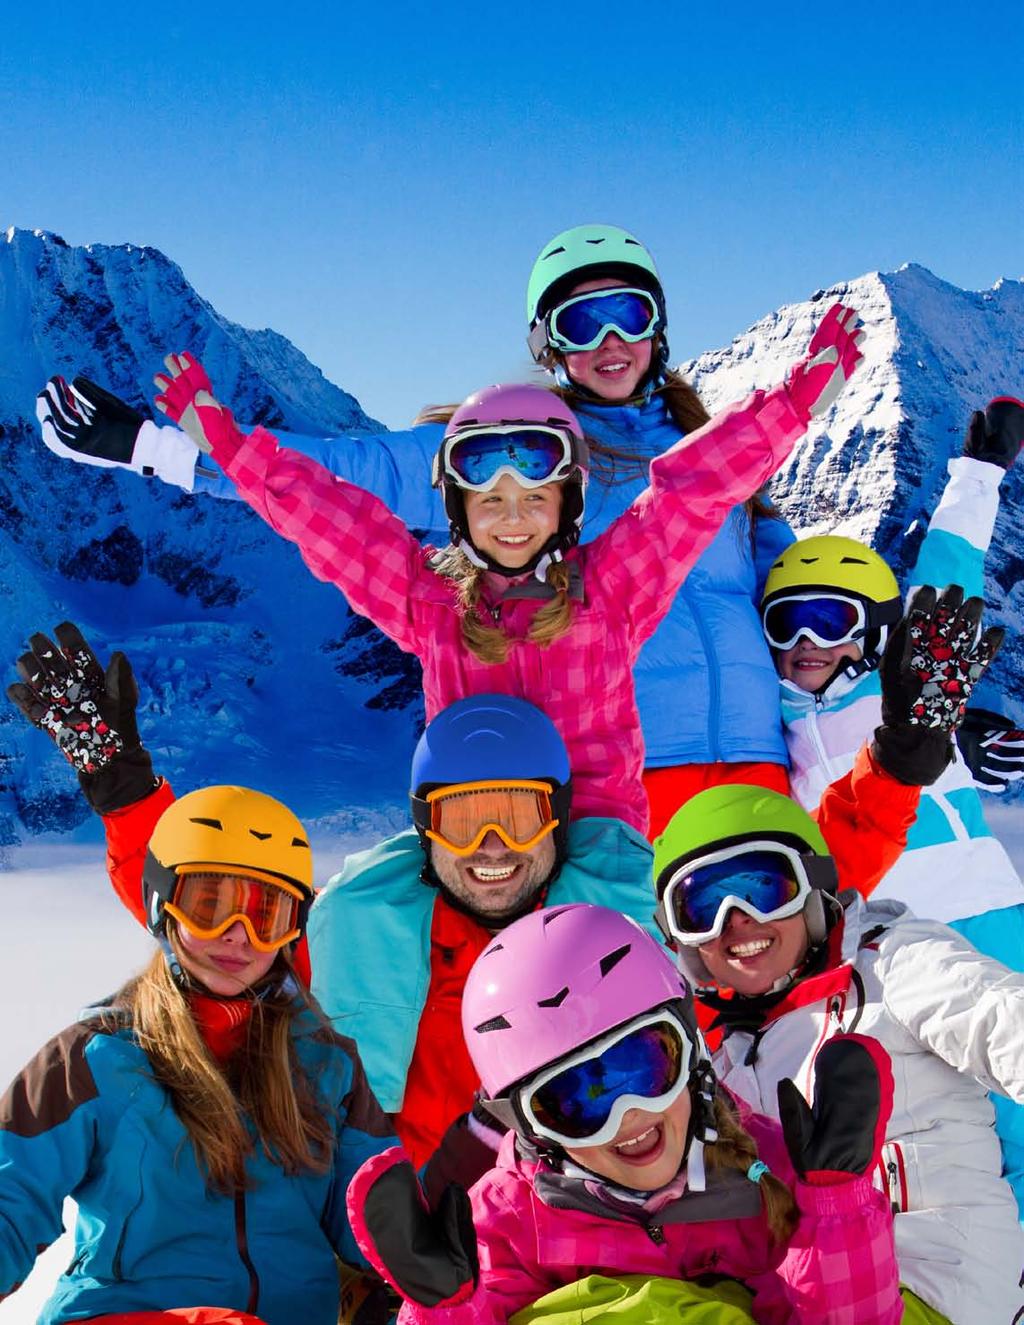 Our aim is to help you plan and enjoy your perfect ski holiday in the Swiss Alps.